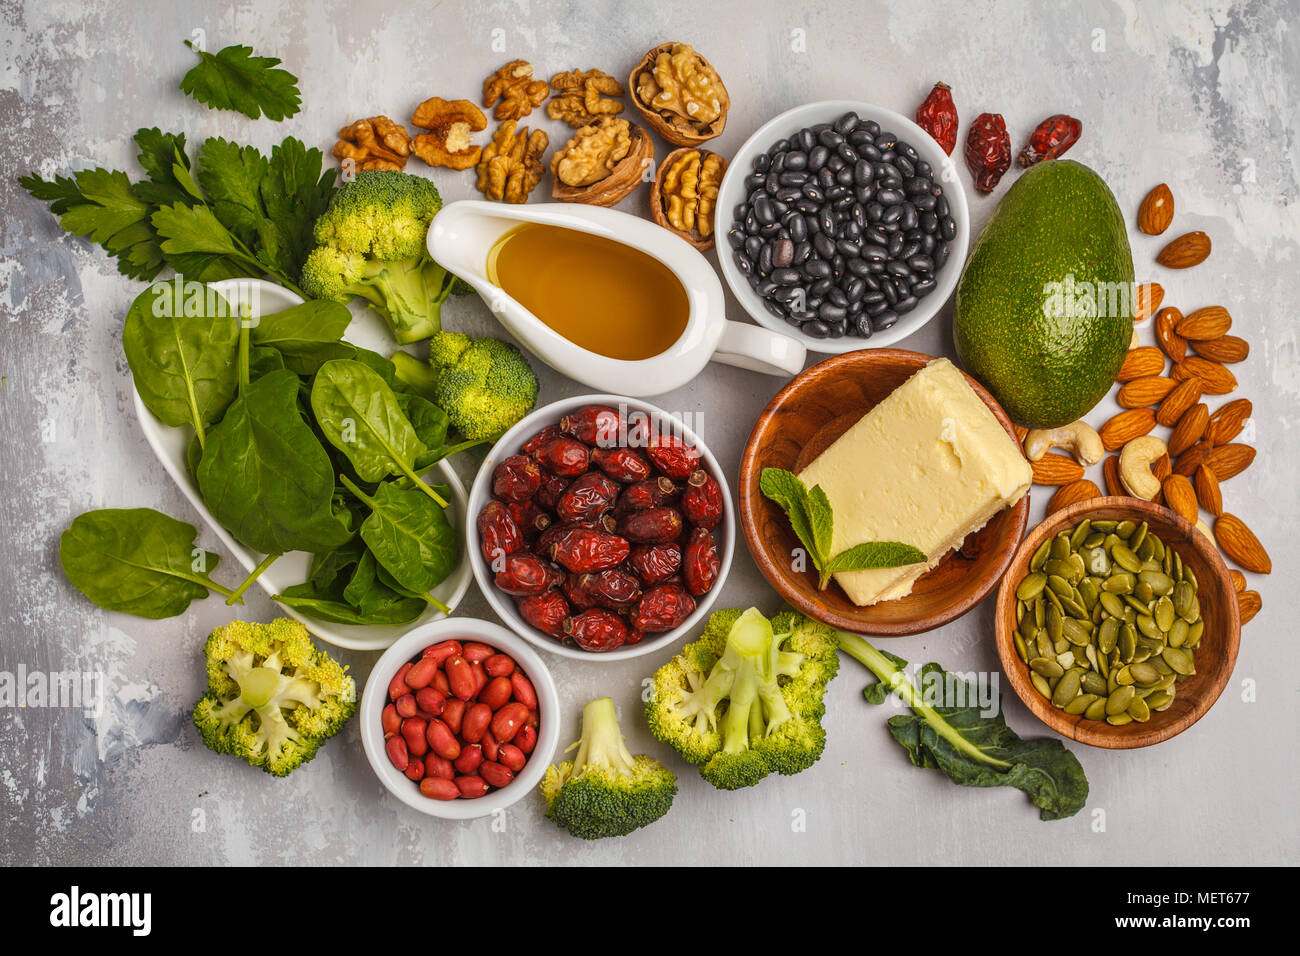 Healthy food nutrition dieting concept. Assortment of high vitamin E sources. Oil, nuts, avocado, butter, healthy fats, rose hips, parsley, seeds Stock Photo